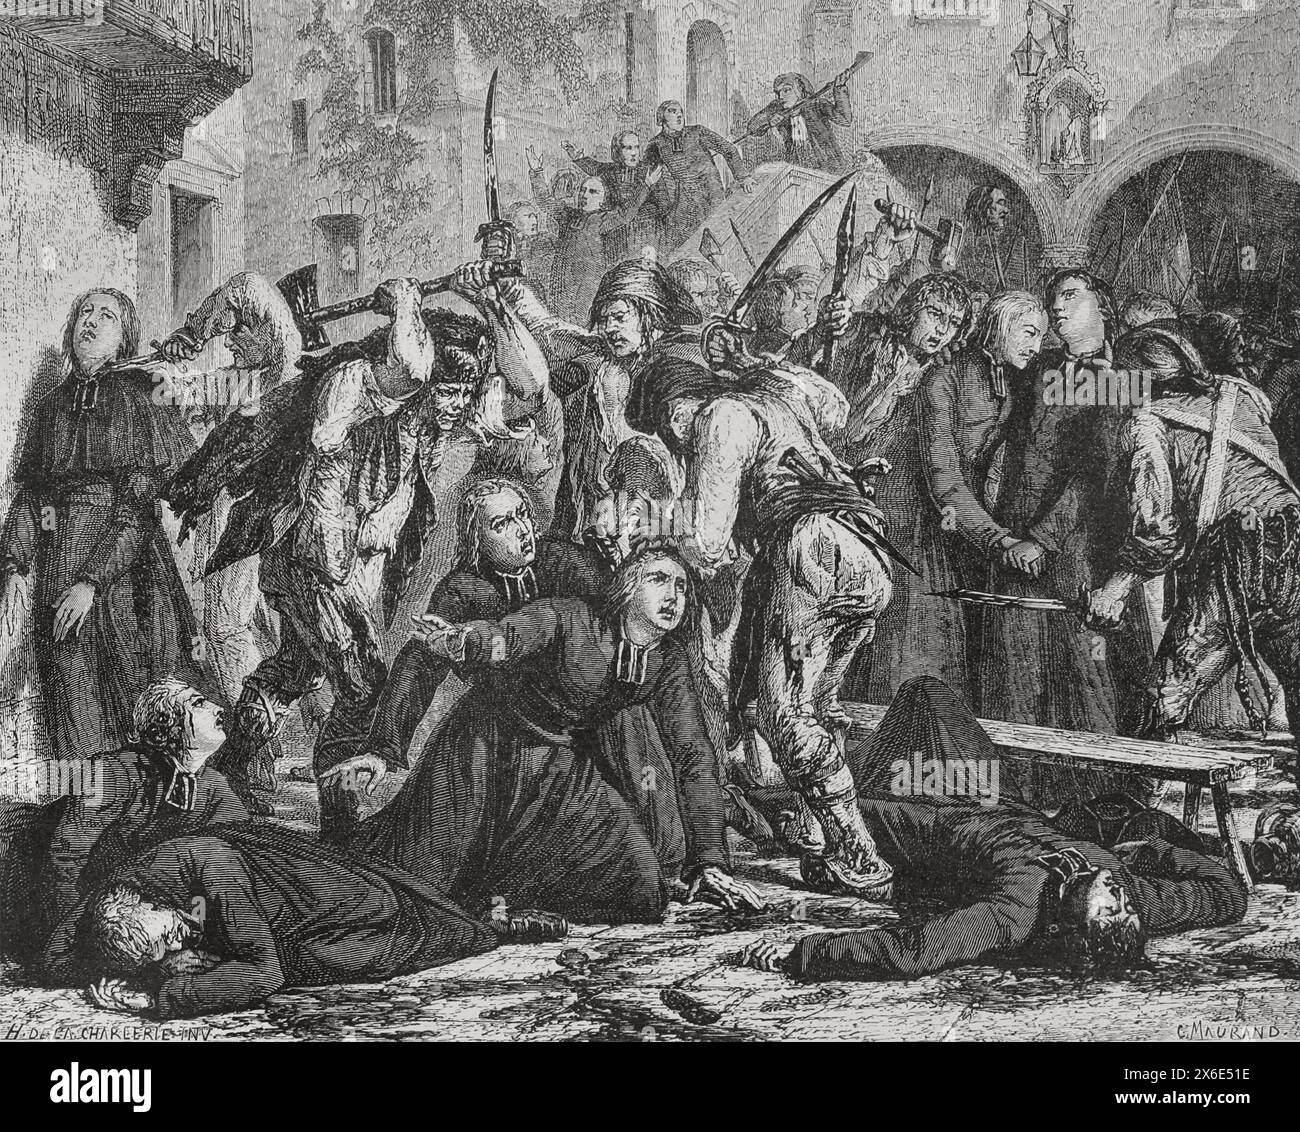 French Revolution. September Massacres (2 to 6 September 1792). The revolutionaries executed mass murders among the prison population all over France, mainly in Paris. Slaughter of clerics. Drawing by Hippolyte de la Charlerie. Engraving by Maurand. 'History of the French Revolution'. Volume I, 1876. Stock Photo